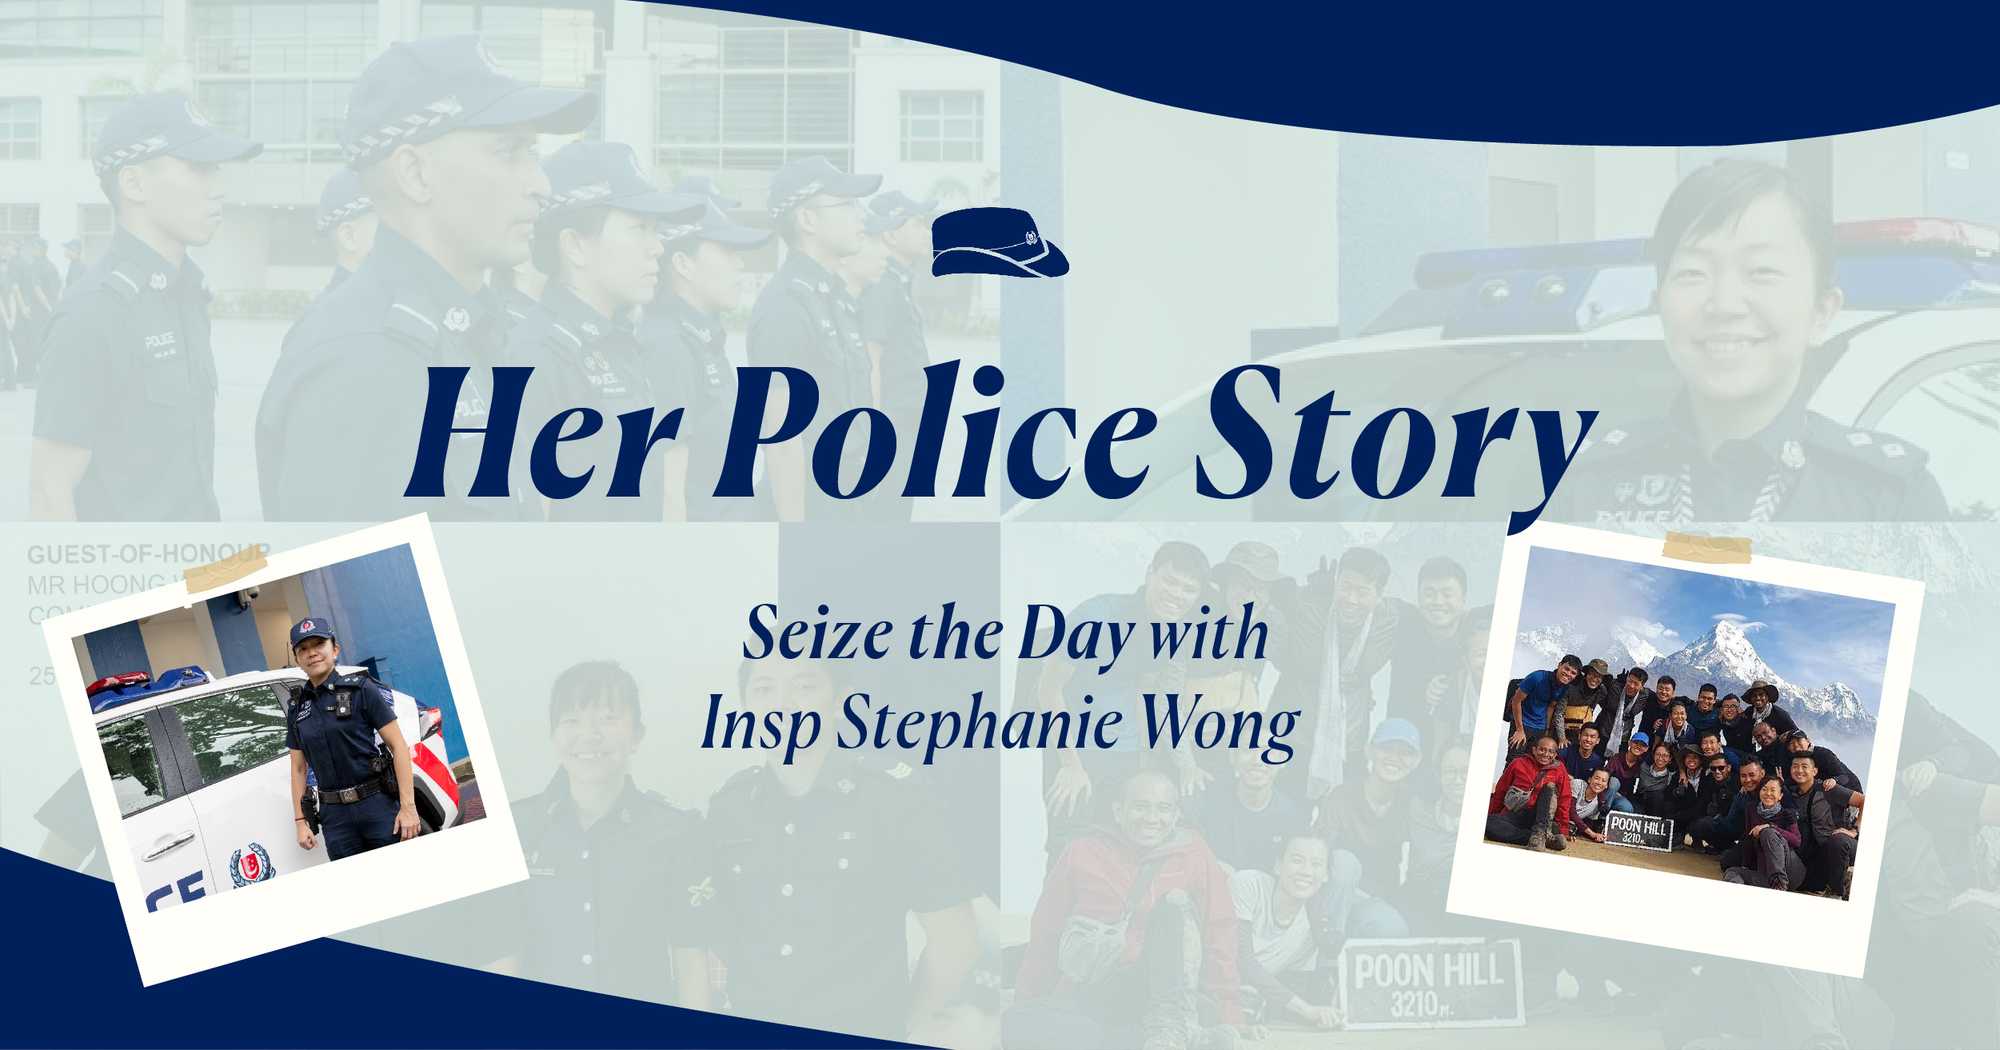 Police Life 022024 Her Police Story Seize the Day with Insp Stephanie Wong 00